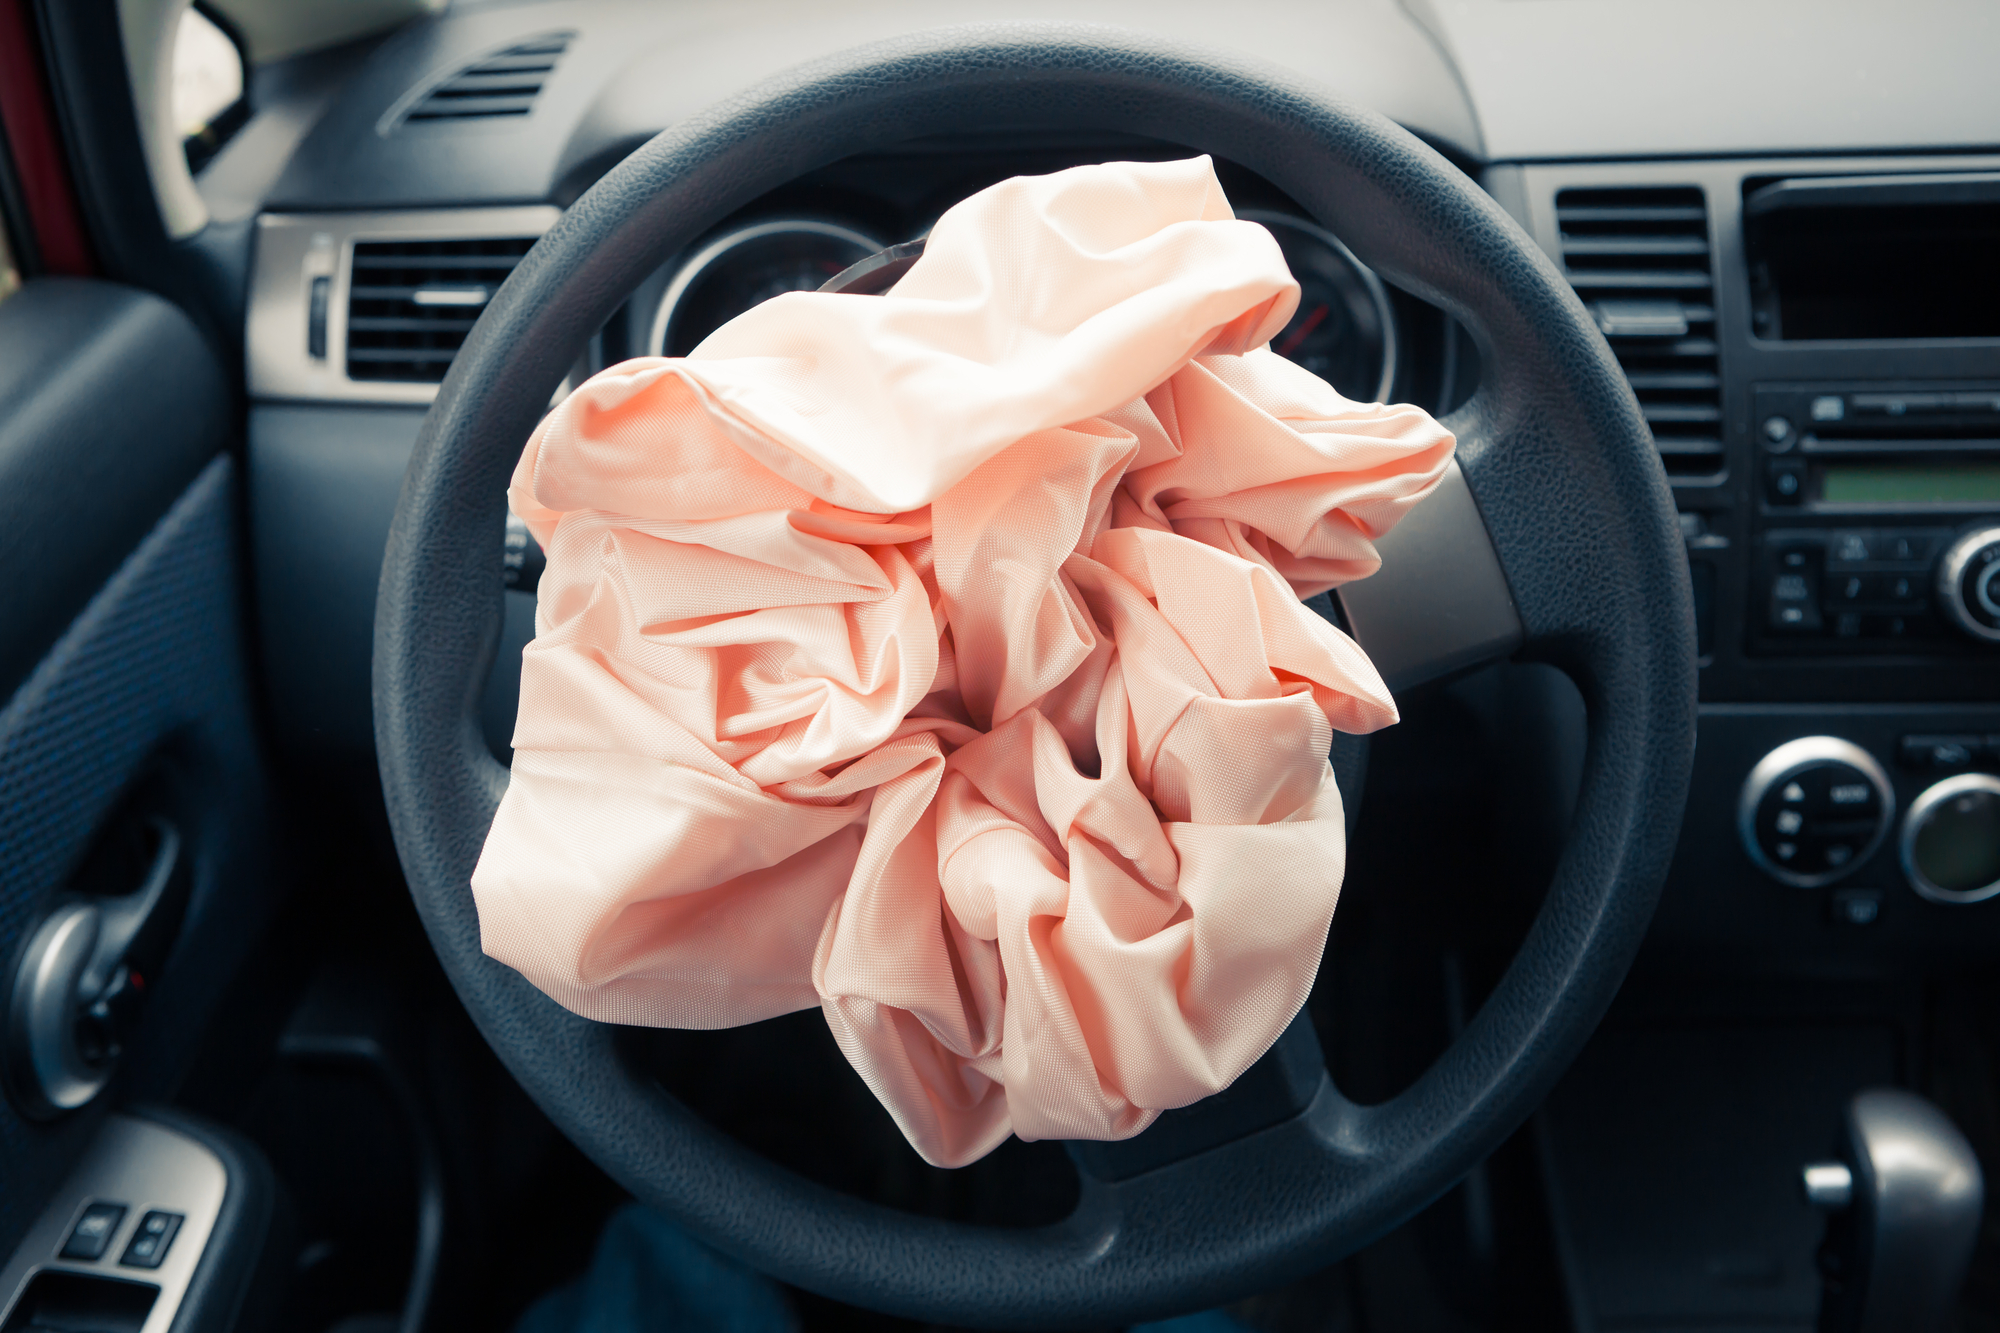 Confidential Seven Figure Settlement for Car’s Airbag Failure that Caused Fatal Injuries